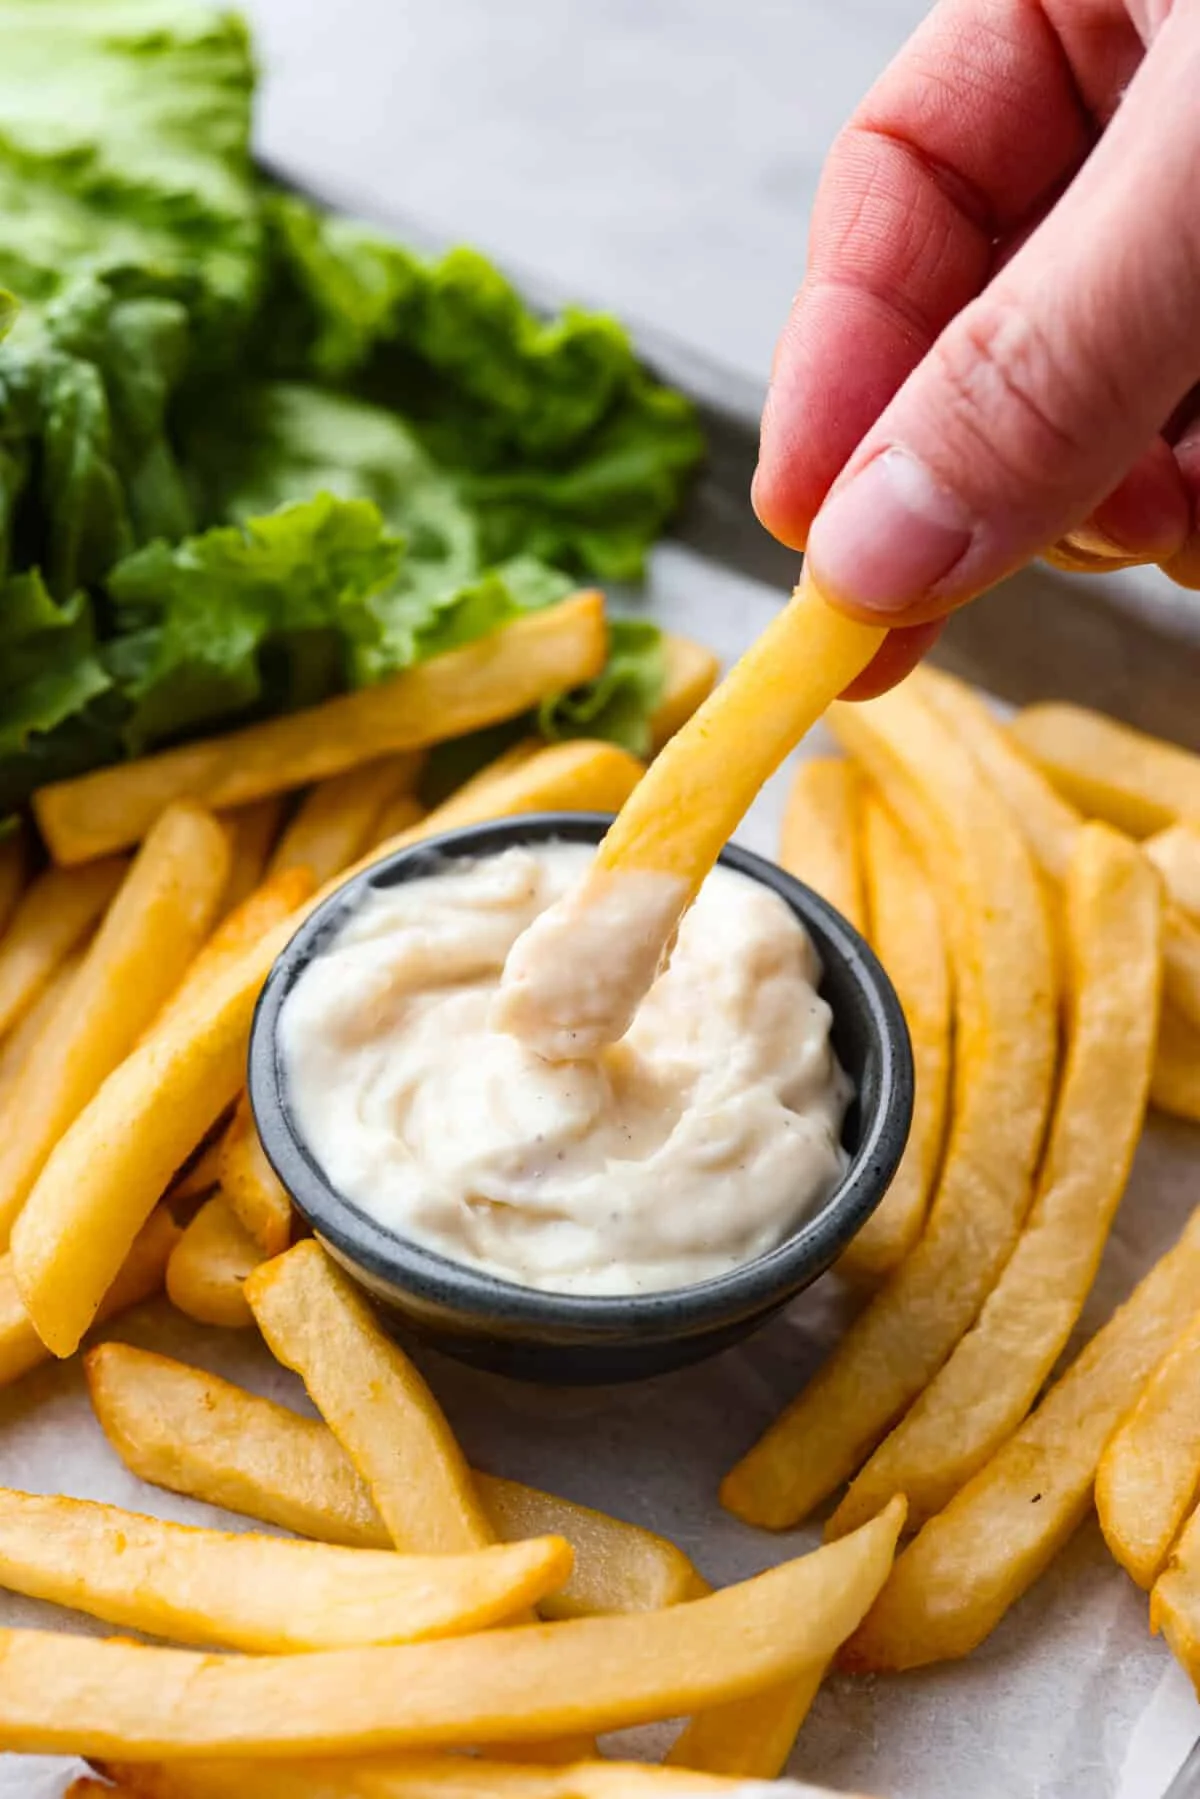 Close view of a French fry dipping in a bowl of donkey sauce. French fries and burger ingredients are scattered around the jar.